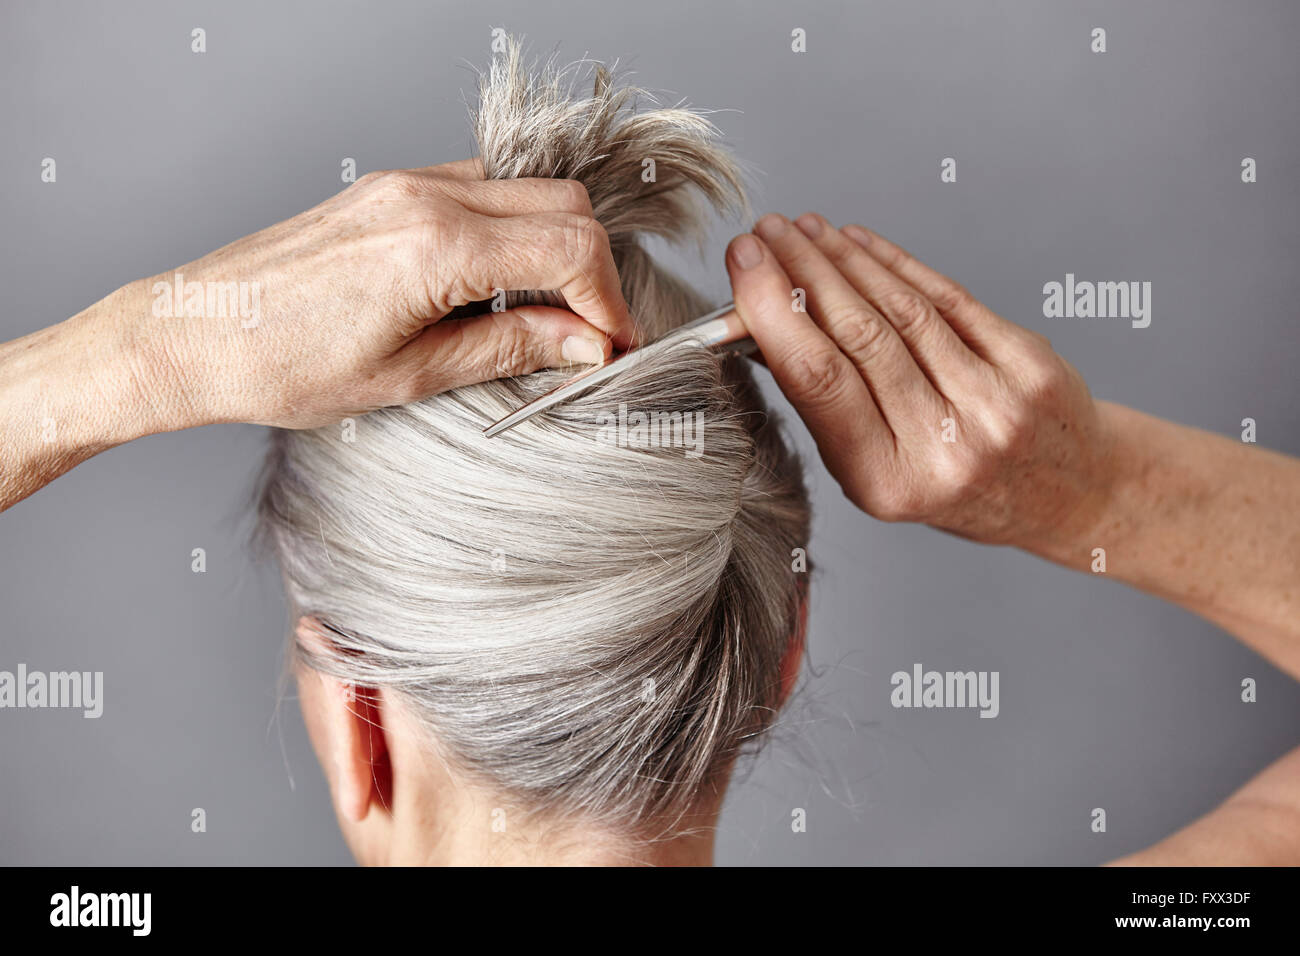 Rear view of woman styling gray hair into bun Stock Photo